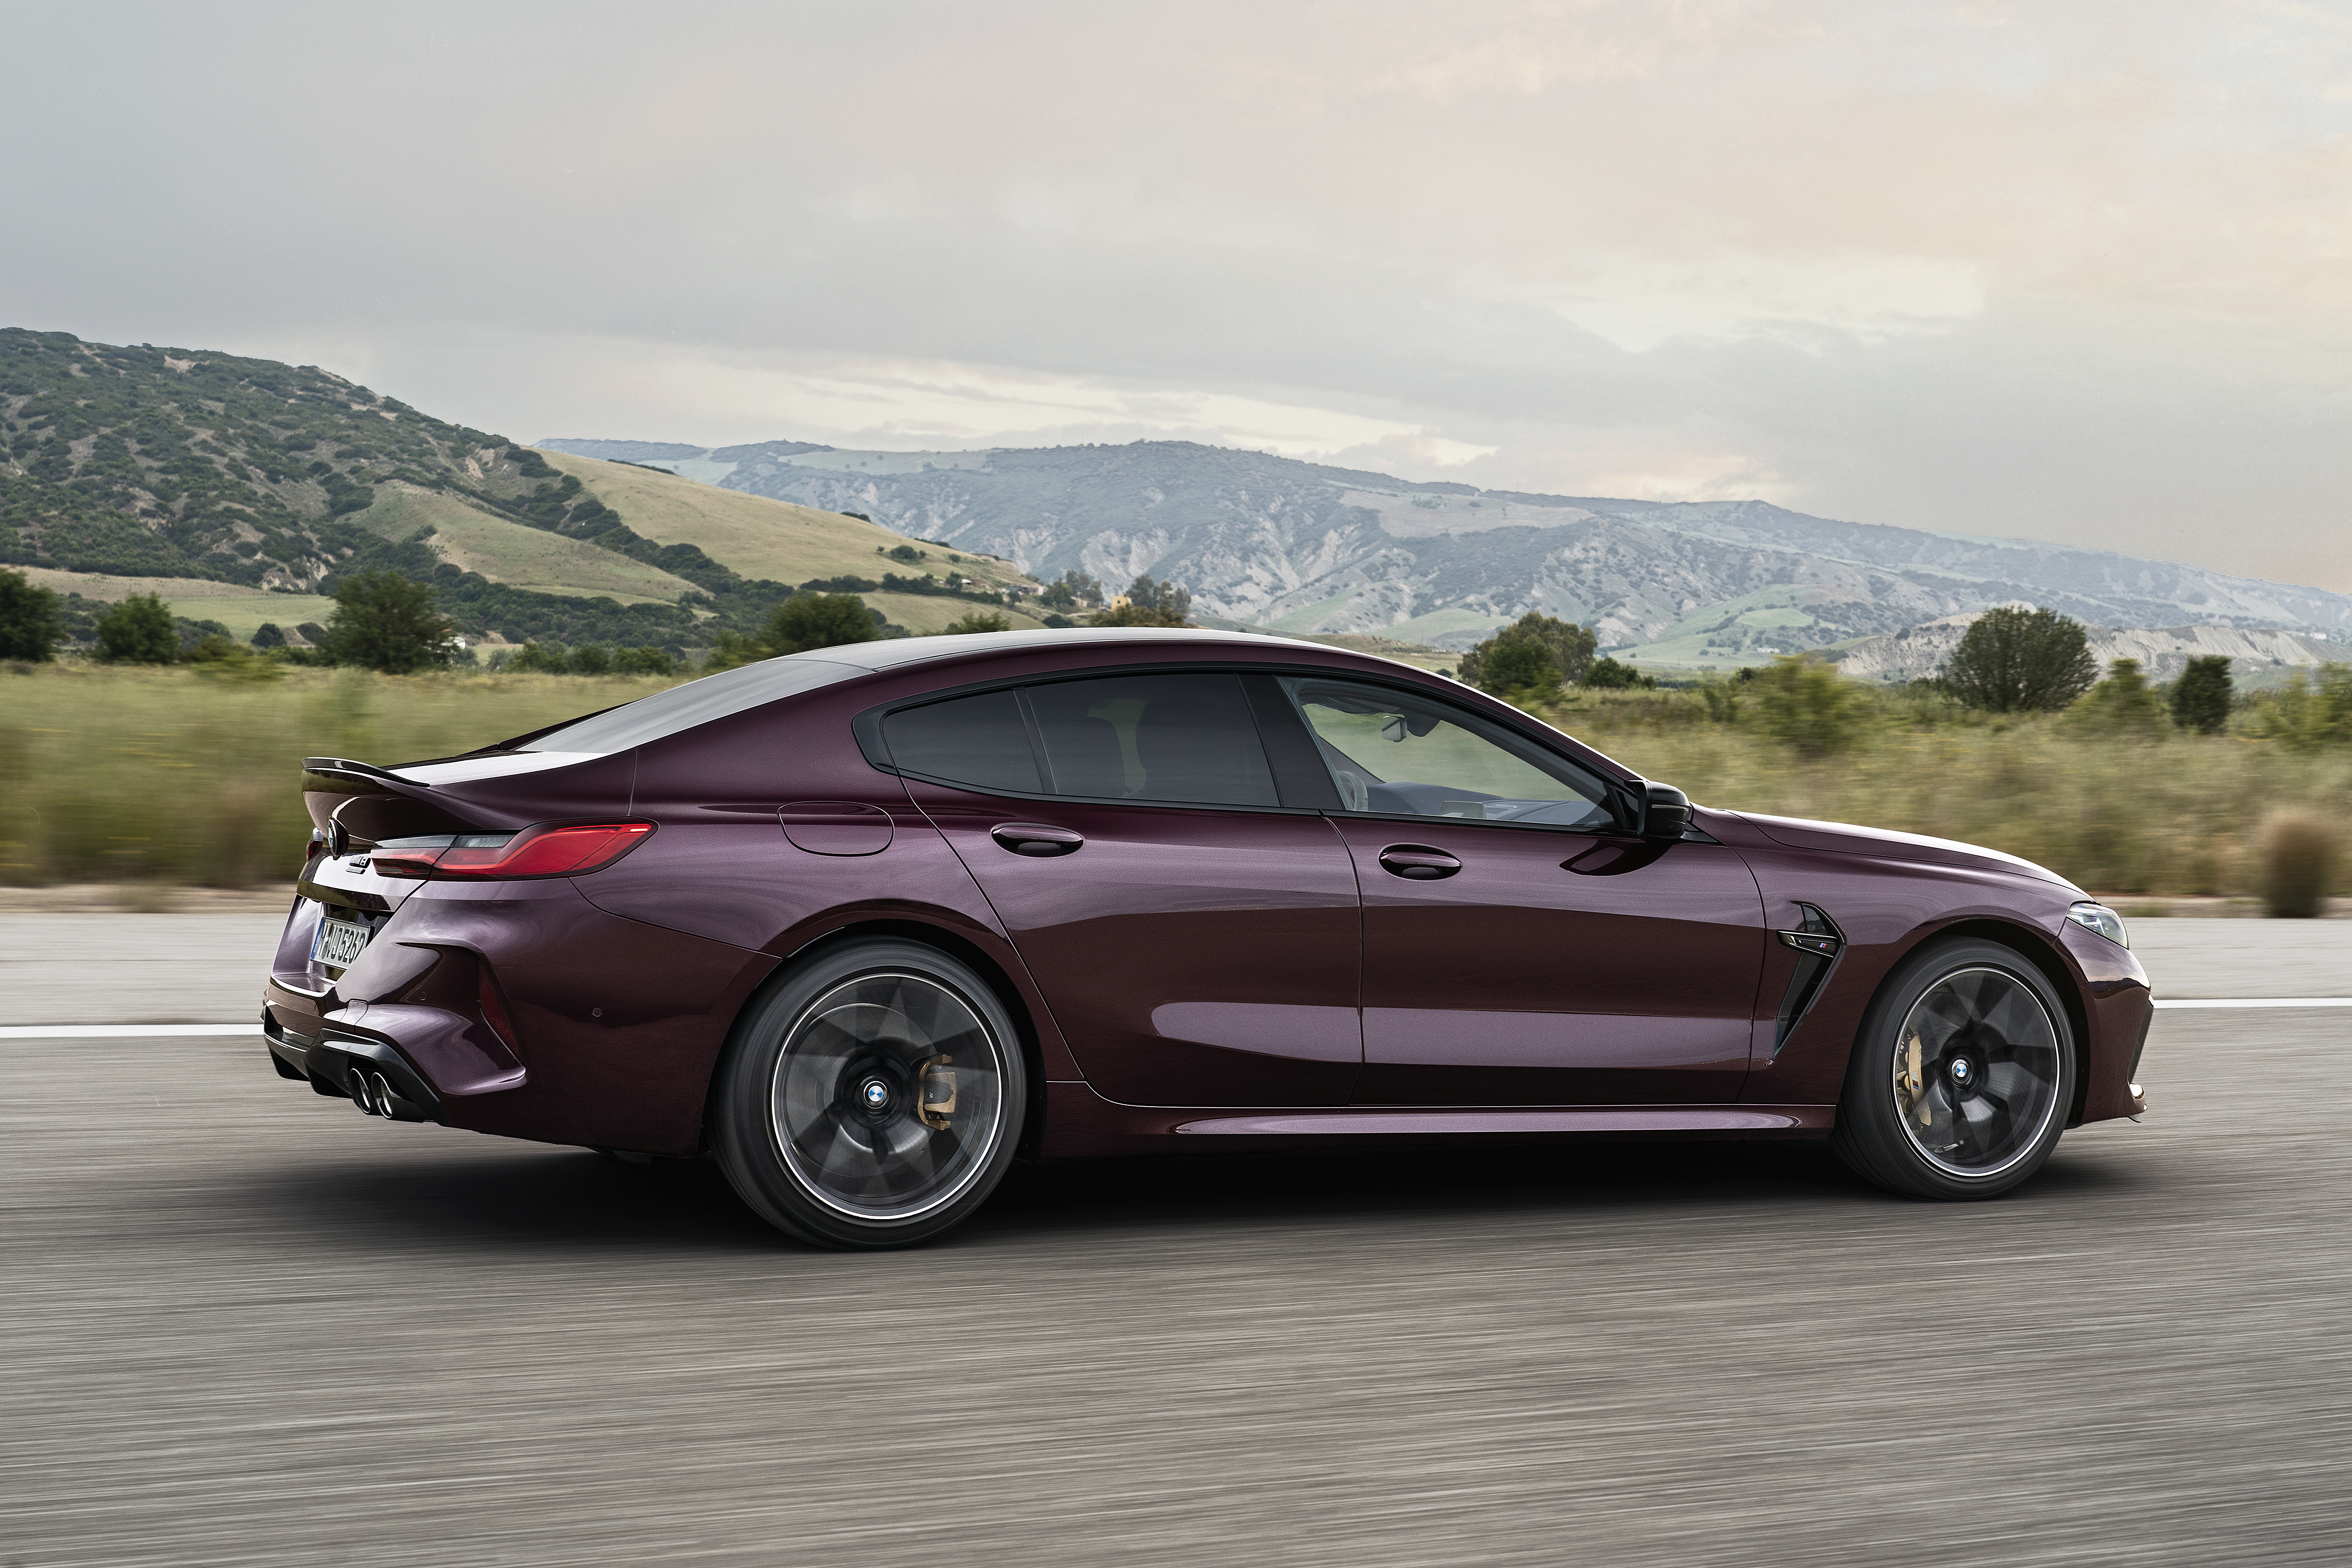 Bmw 8 competition. BMW m8 Coupe 2020. BMW m8 Gran Coupe. BMW m8 Gran Coupe 2019. BMW m8 Competition седан.